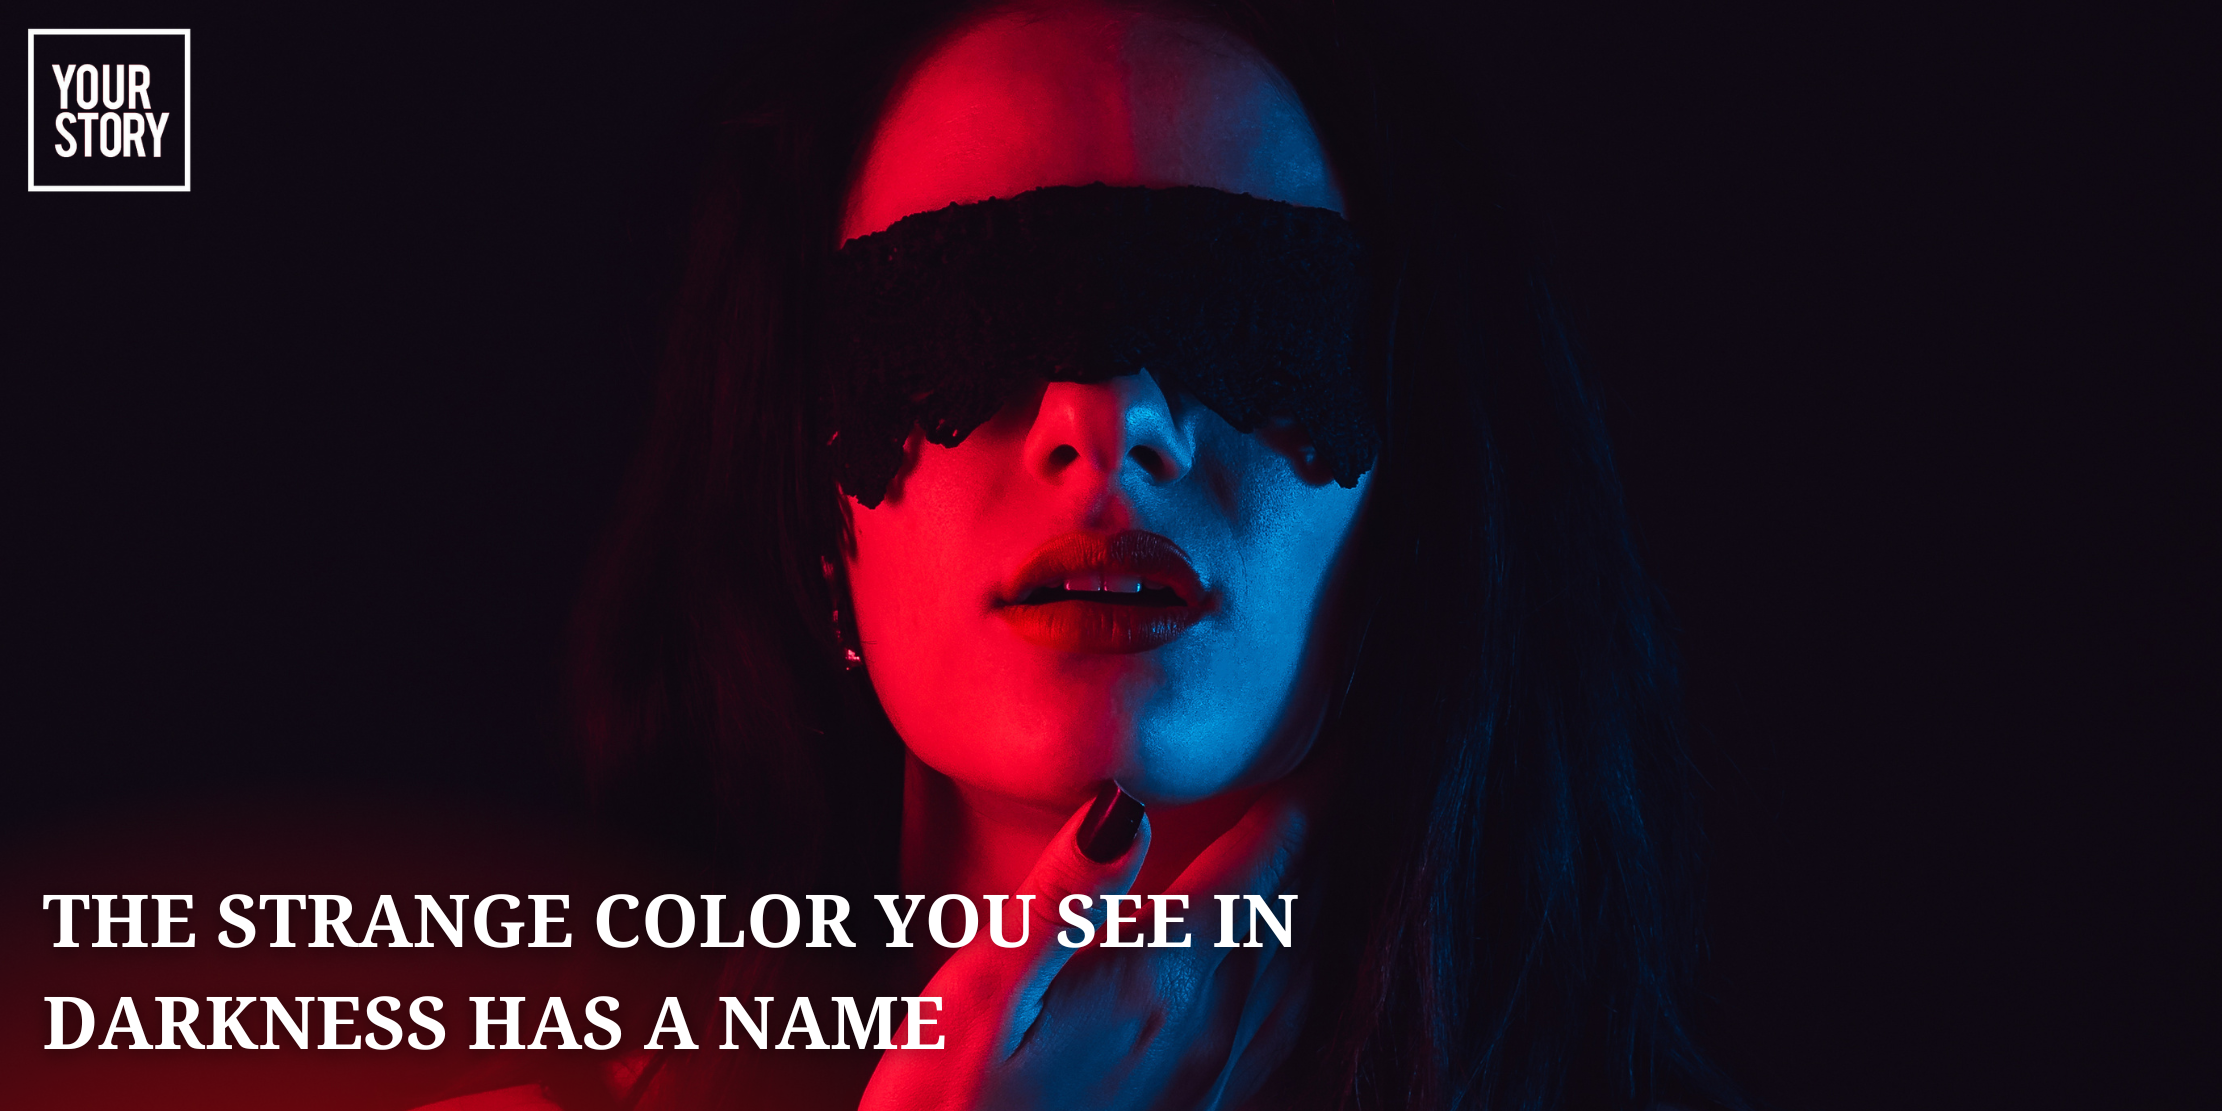 ⁠⁠The Strange Color You See in Darkness Has a Name